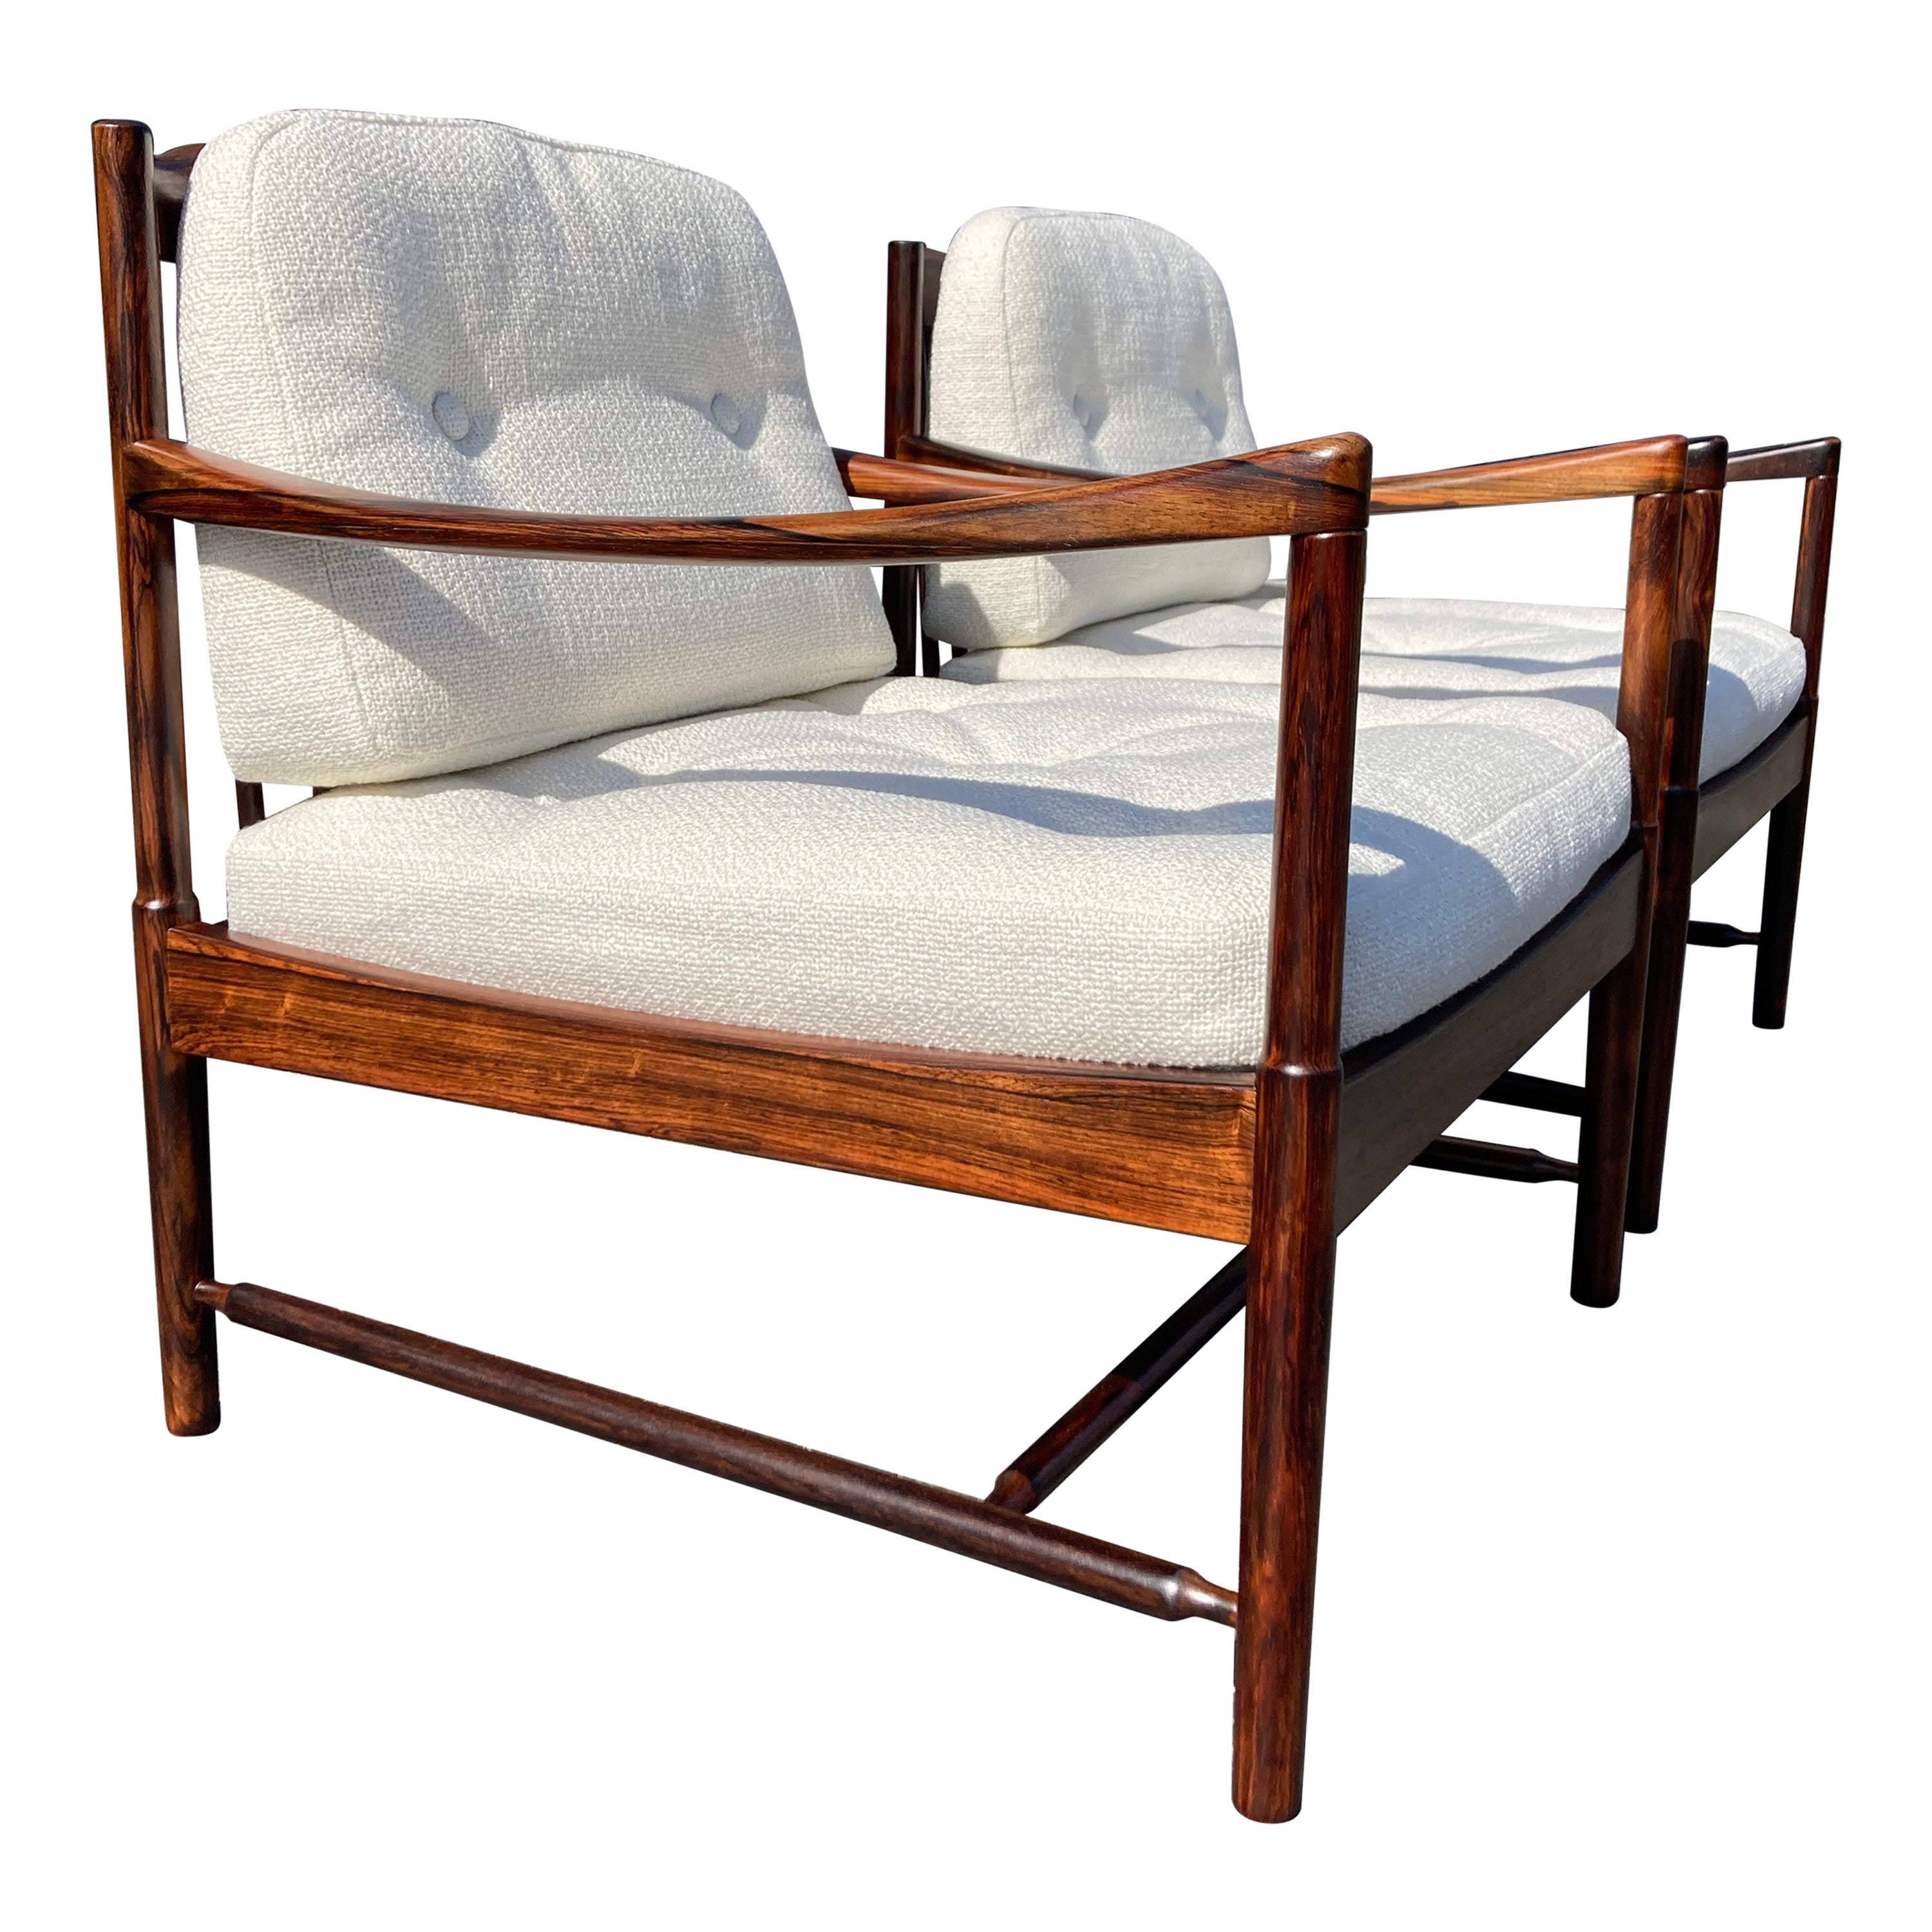 Pair of Rosewood Lounge Chairs Attributed to Kofod Larsen, Danish Modern For Sale